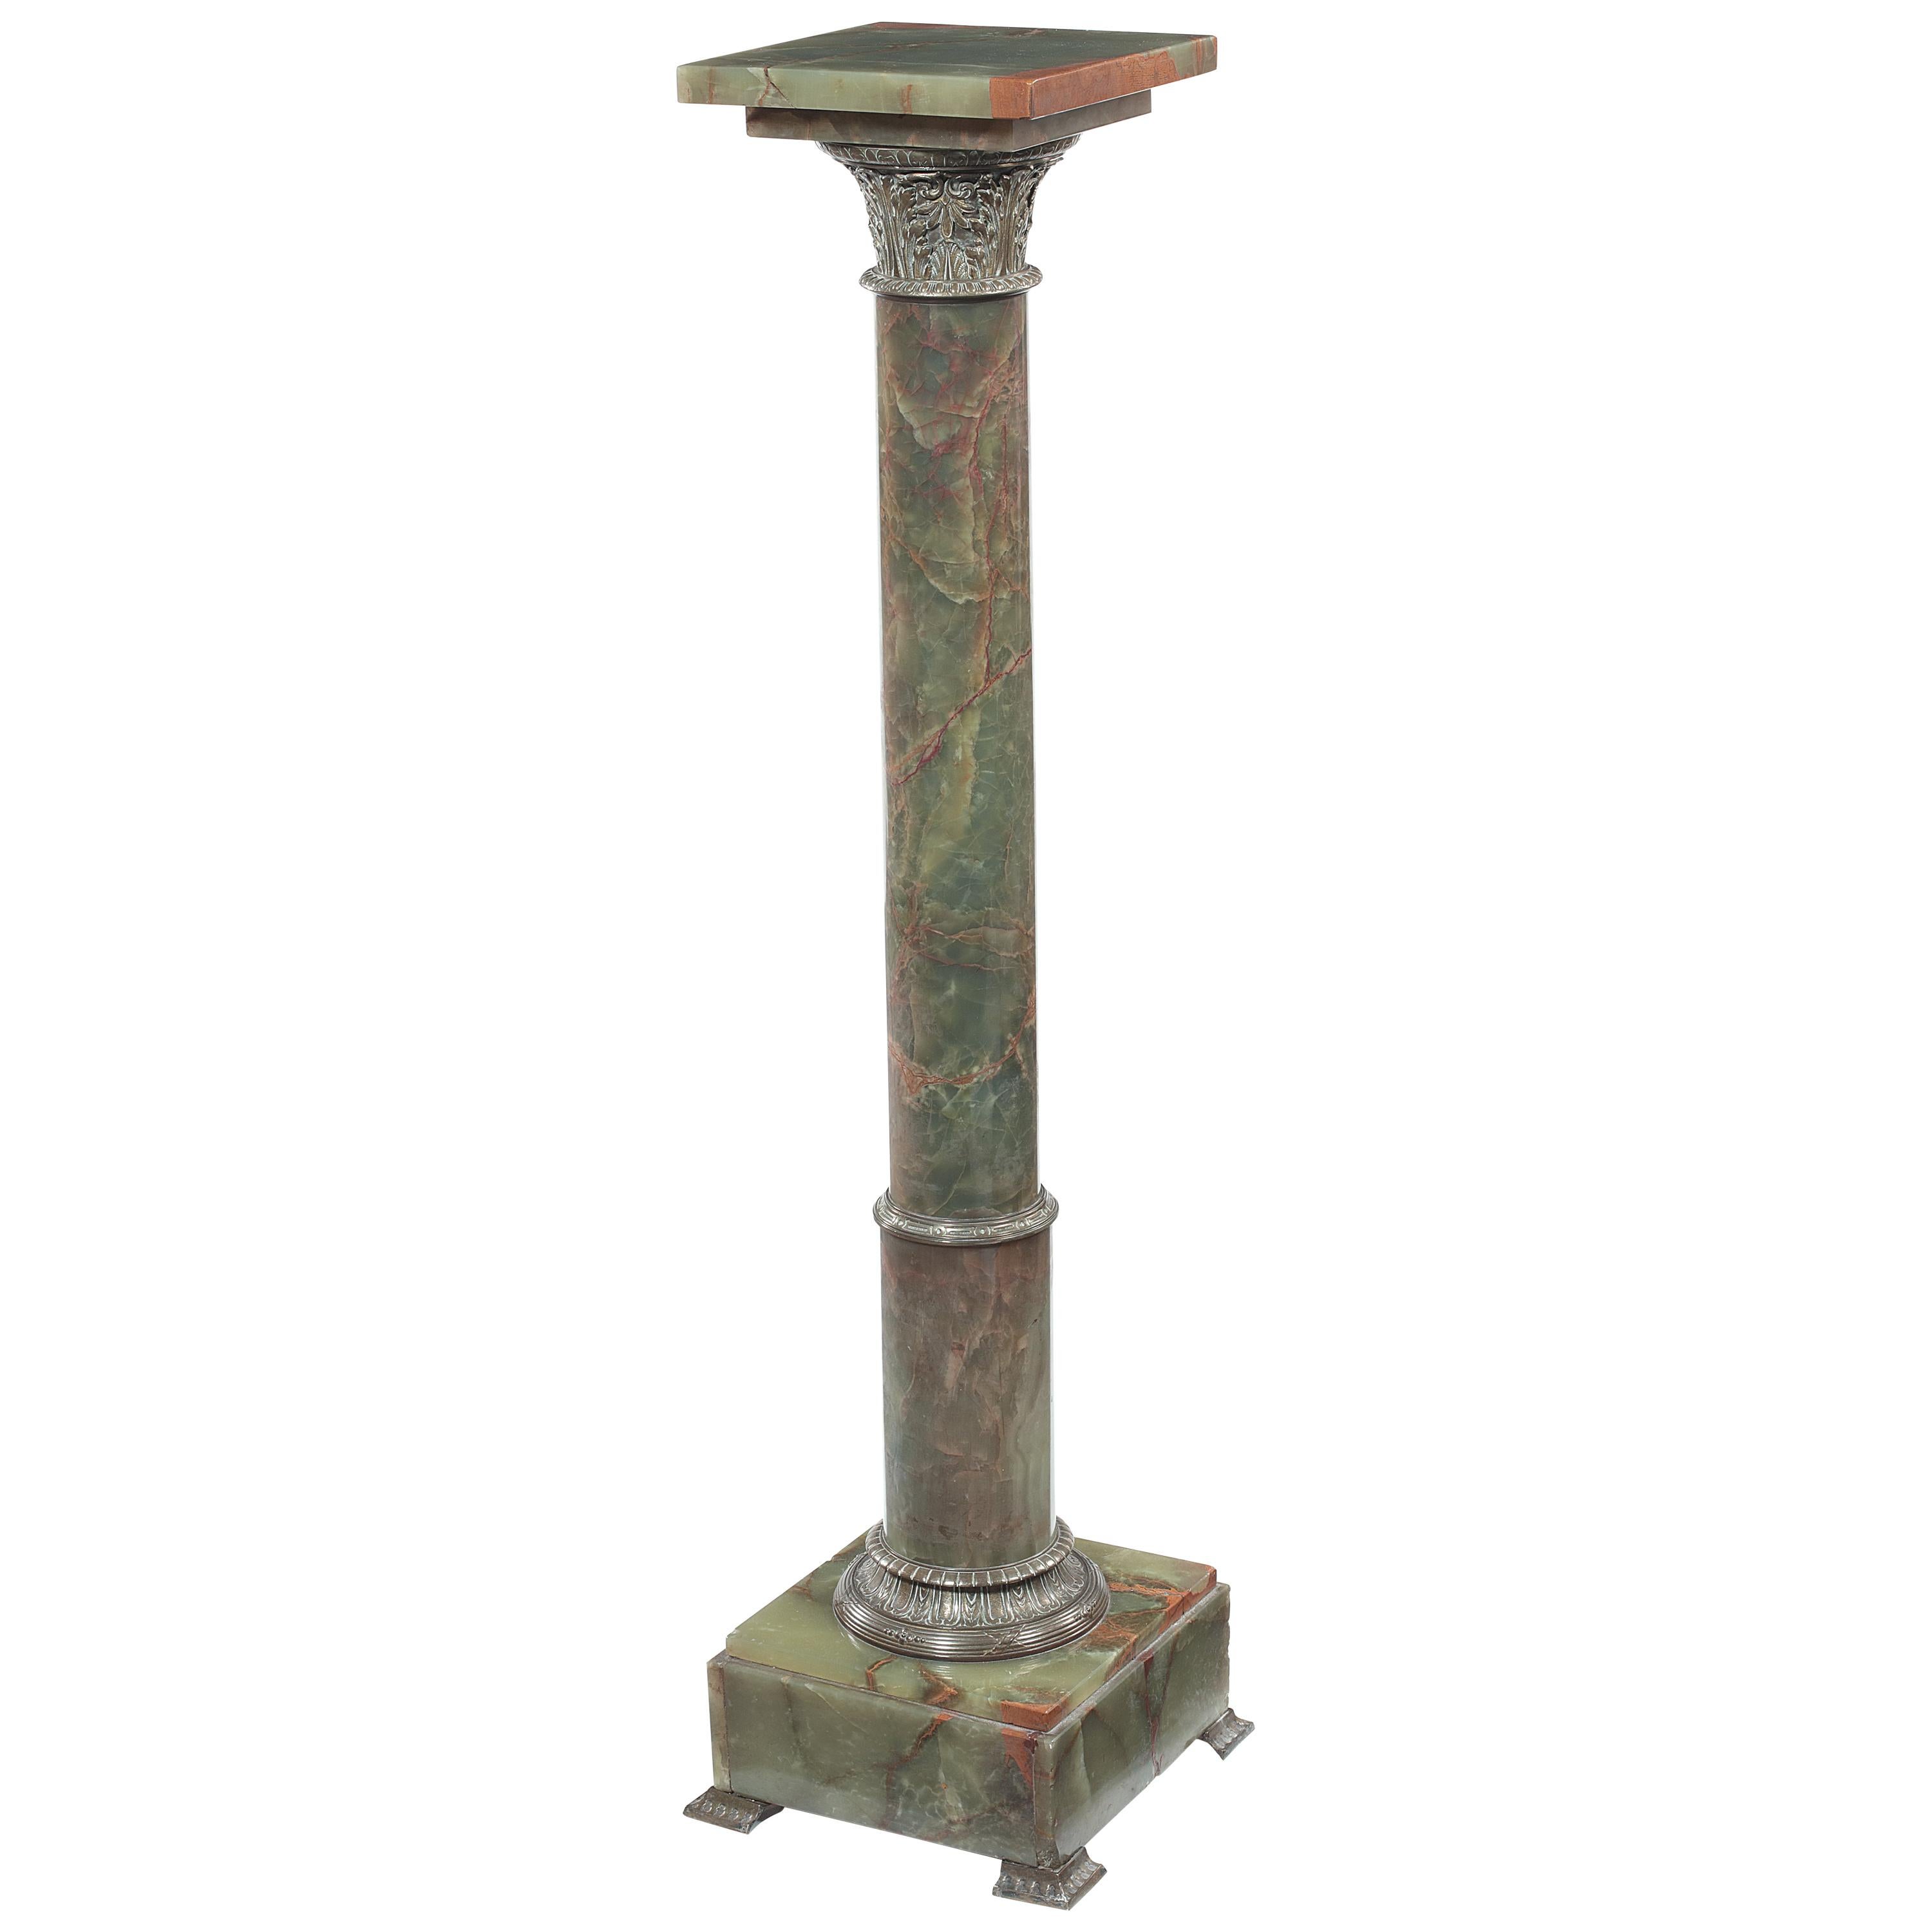 Late 19th Century Green Onyx and Gilt Metal Mounted Column